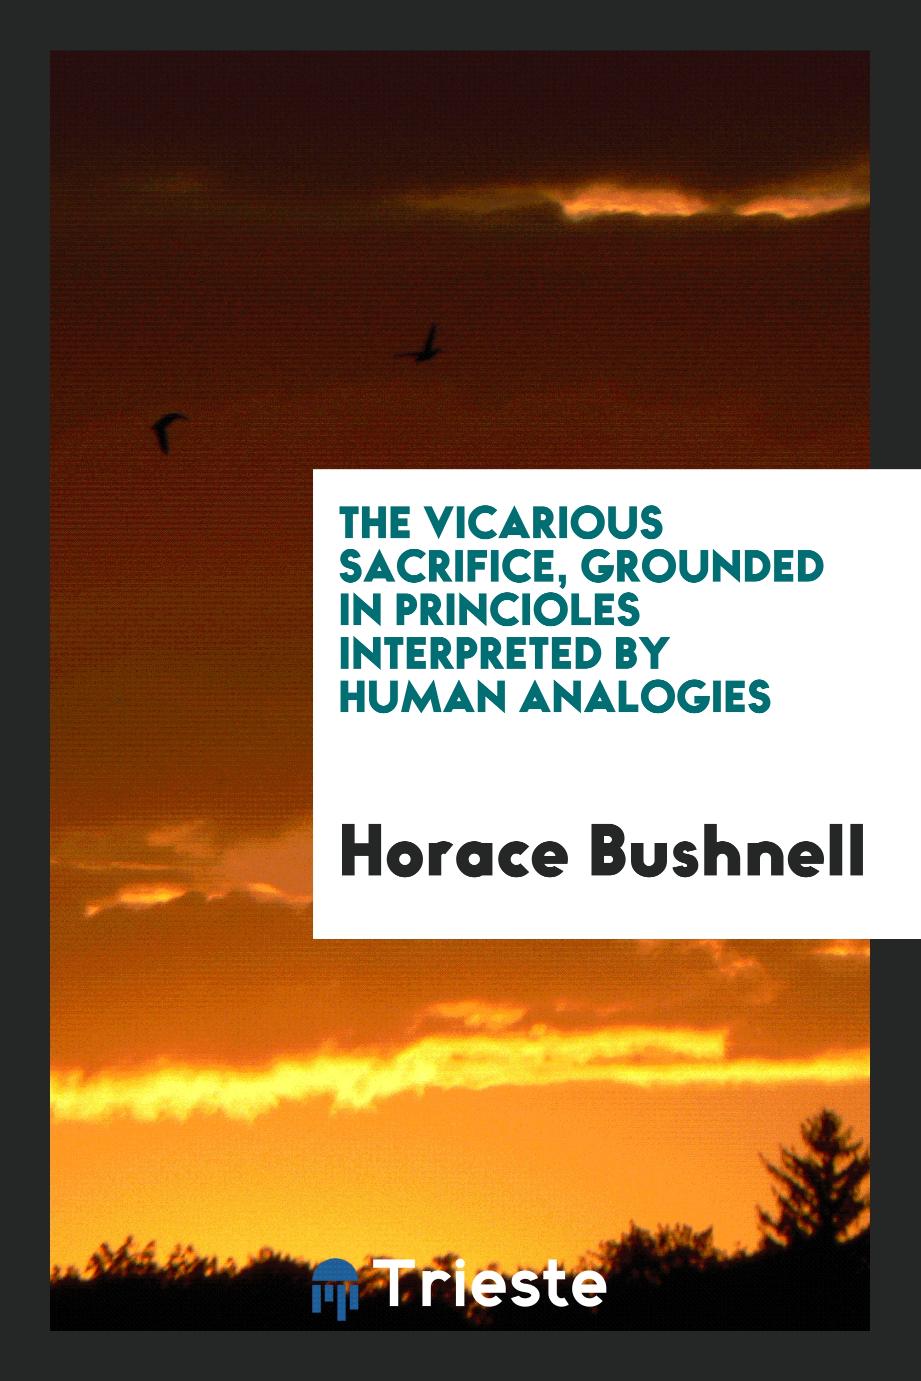 The Vicarious Sacrifice, Grounded in Princioles interpreted by Human Analogies